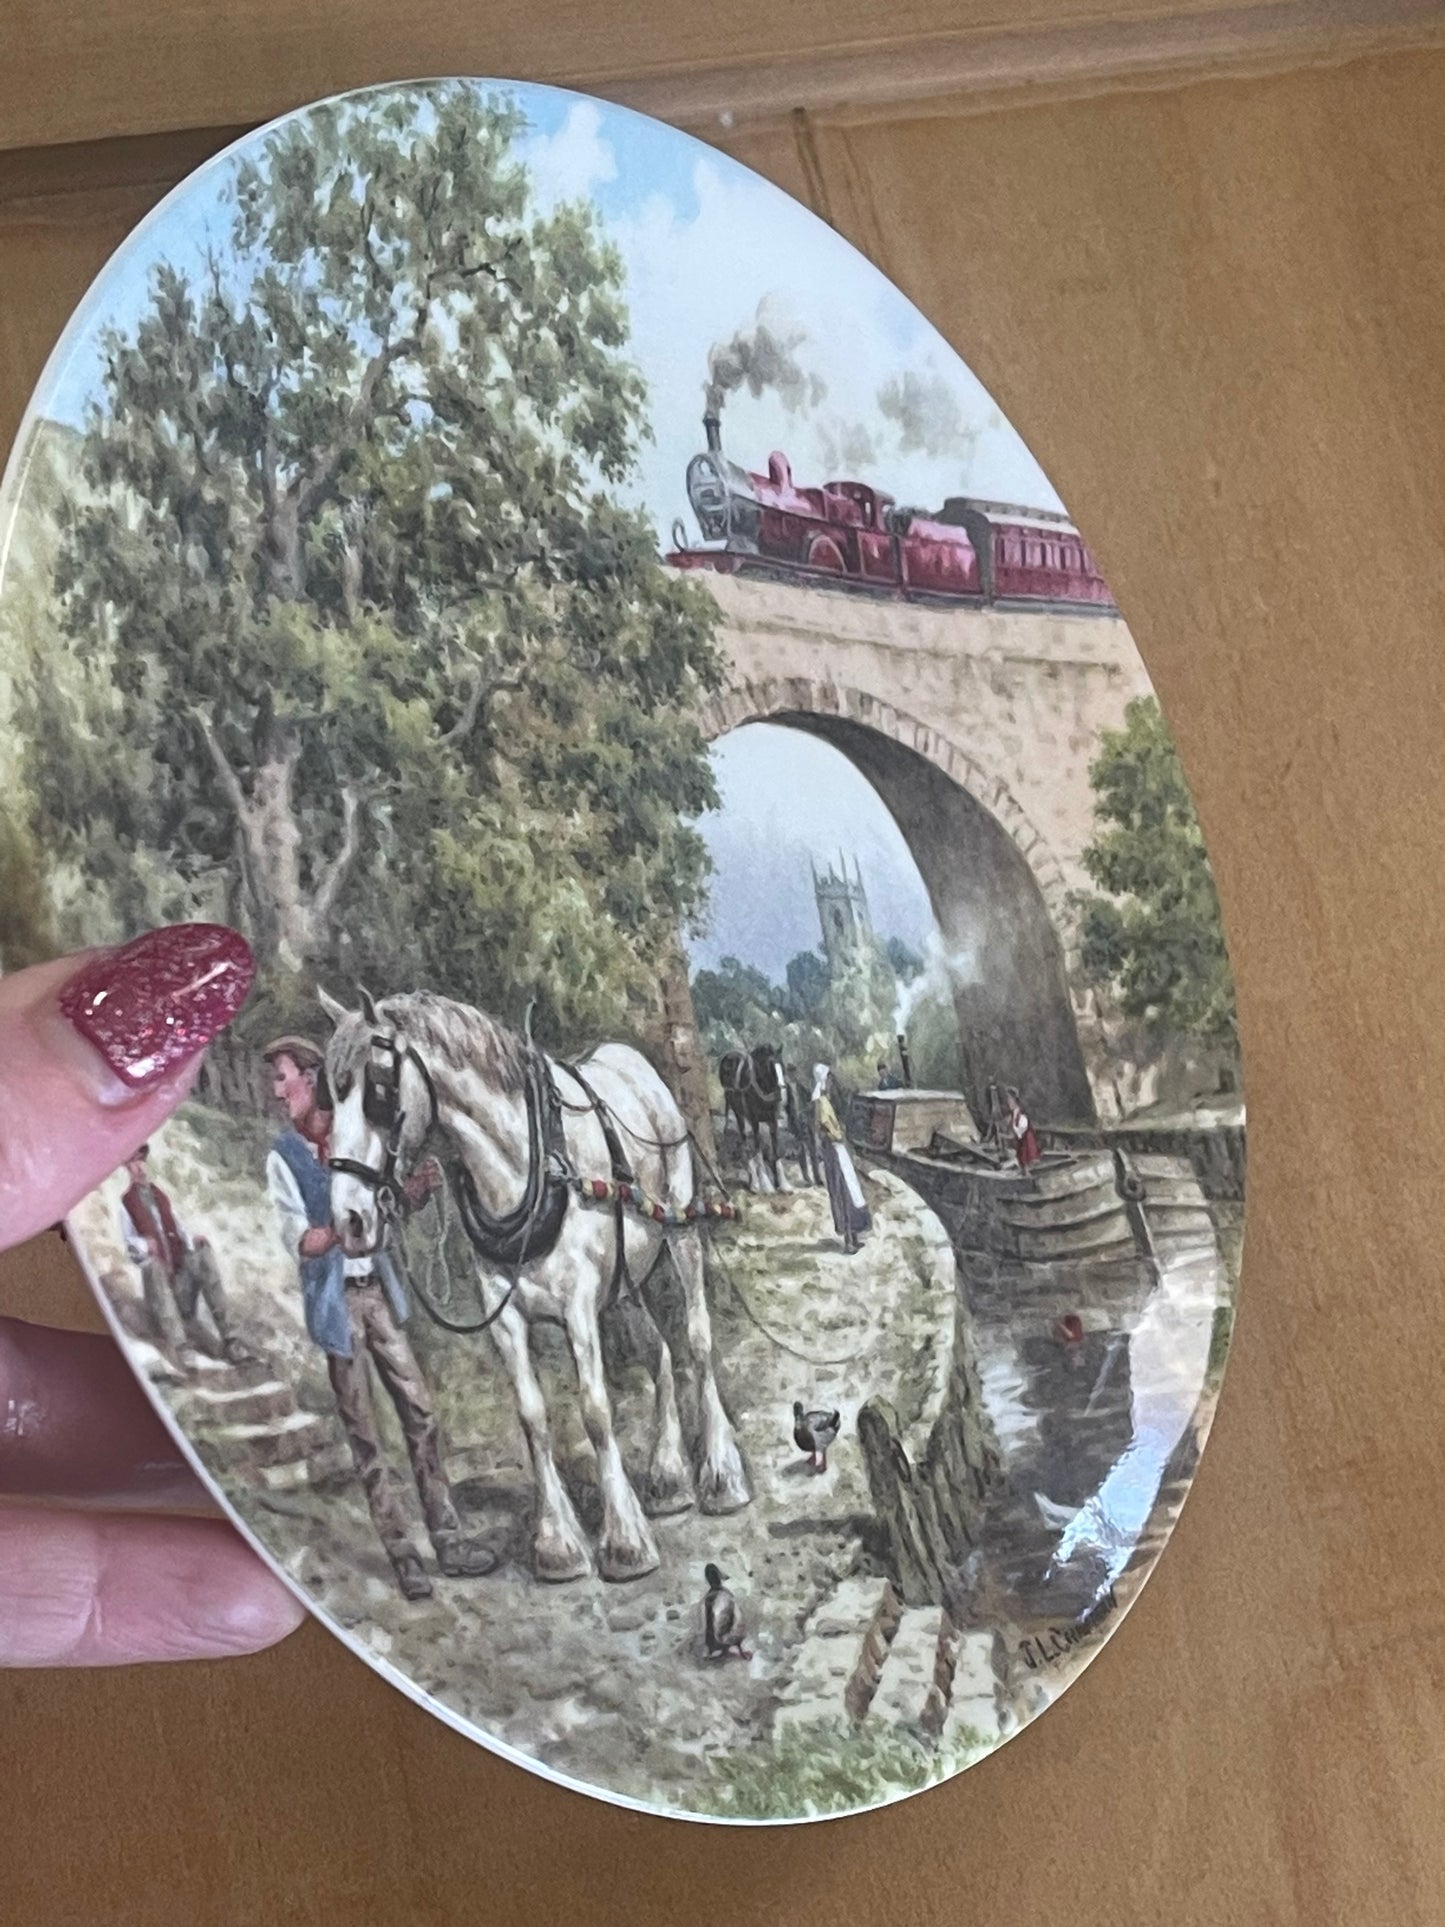 Wedgwood plate featuring shire horses Over the Canal by J Chapman